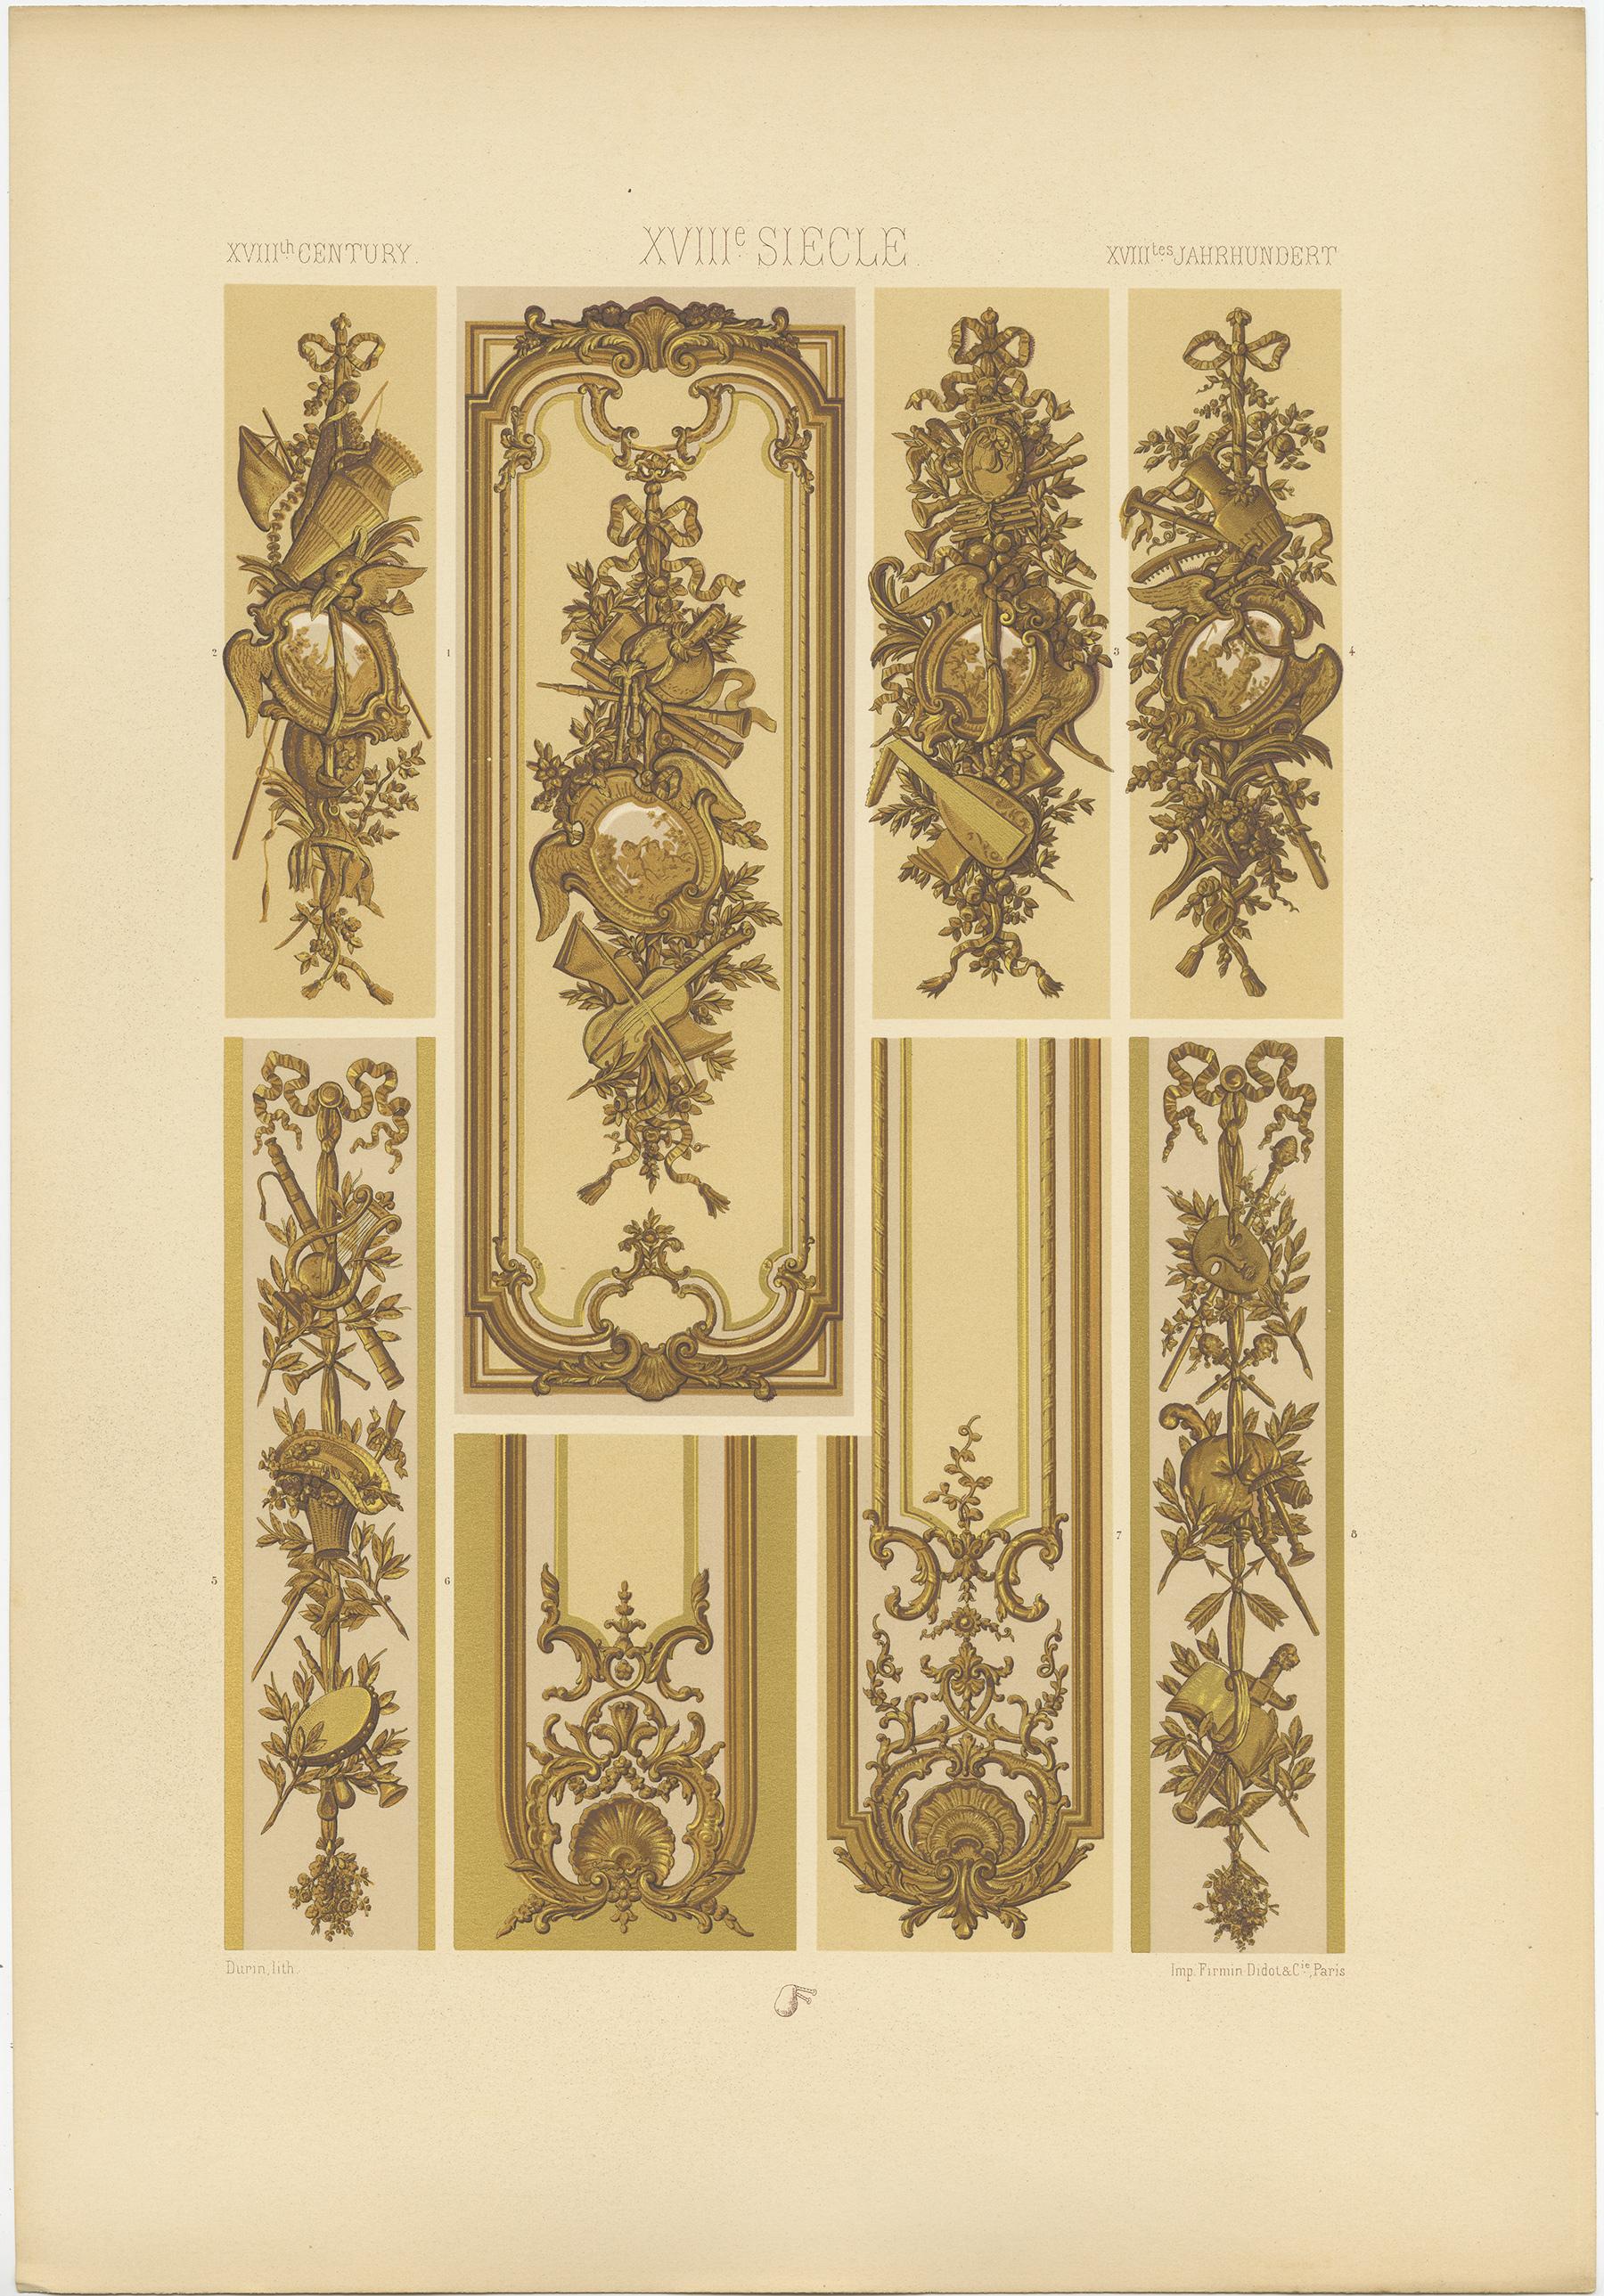 Antique print titled '18th Century - XIIIc Siècle -XVIIIles Jahrhundert'. Chromolithograph of carved and gilt wall panels from the Palace of Versailles ornaments. This print originates from 'l'Ornement Polychrome' by Auguste Racinet. Published circa